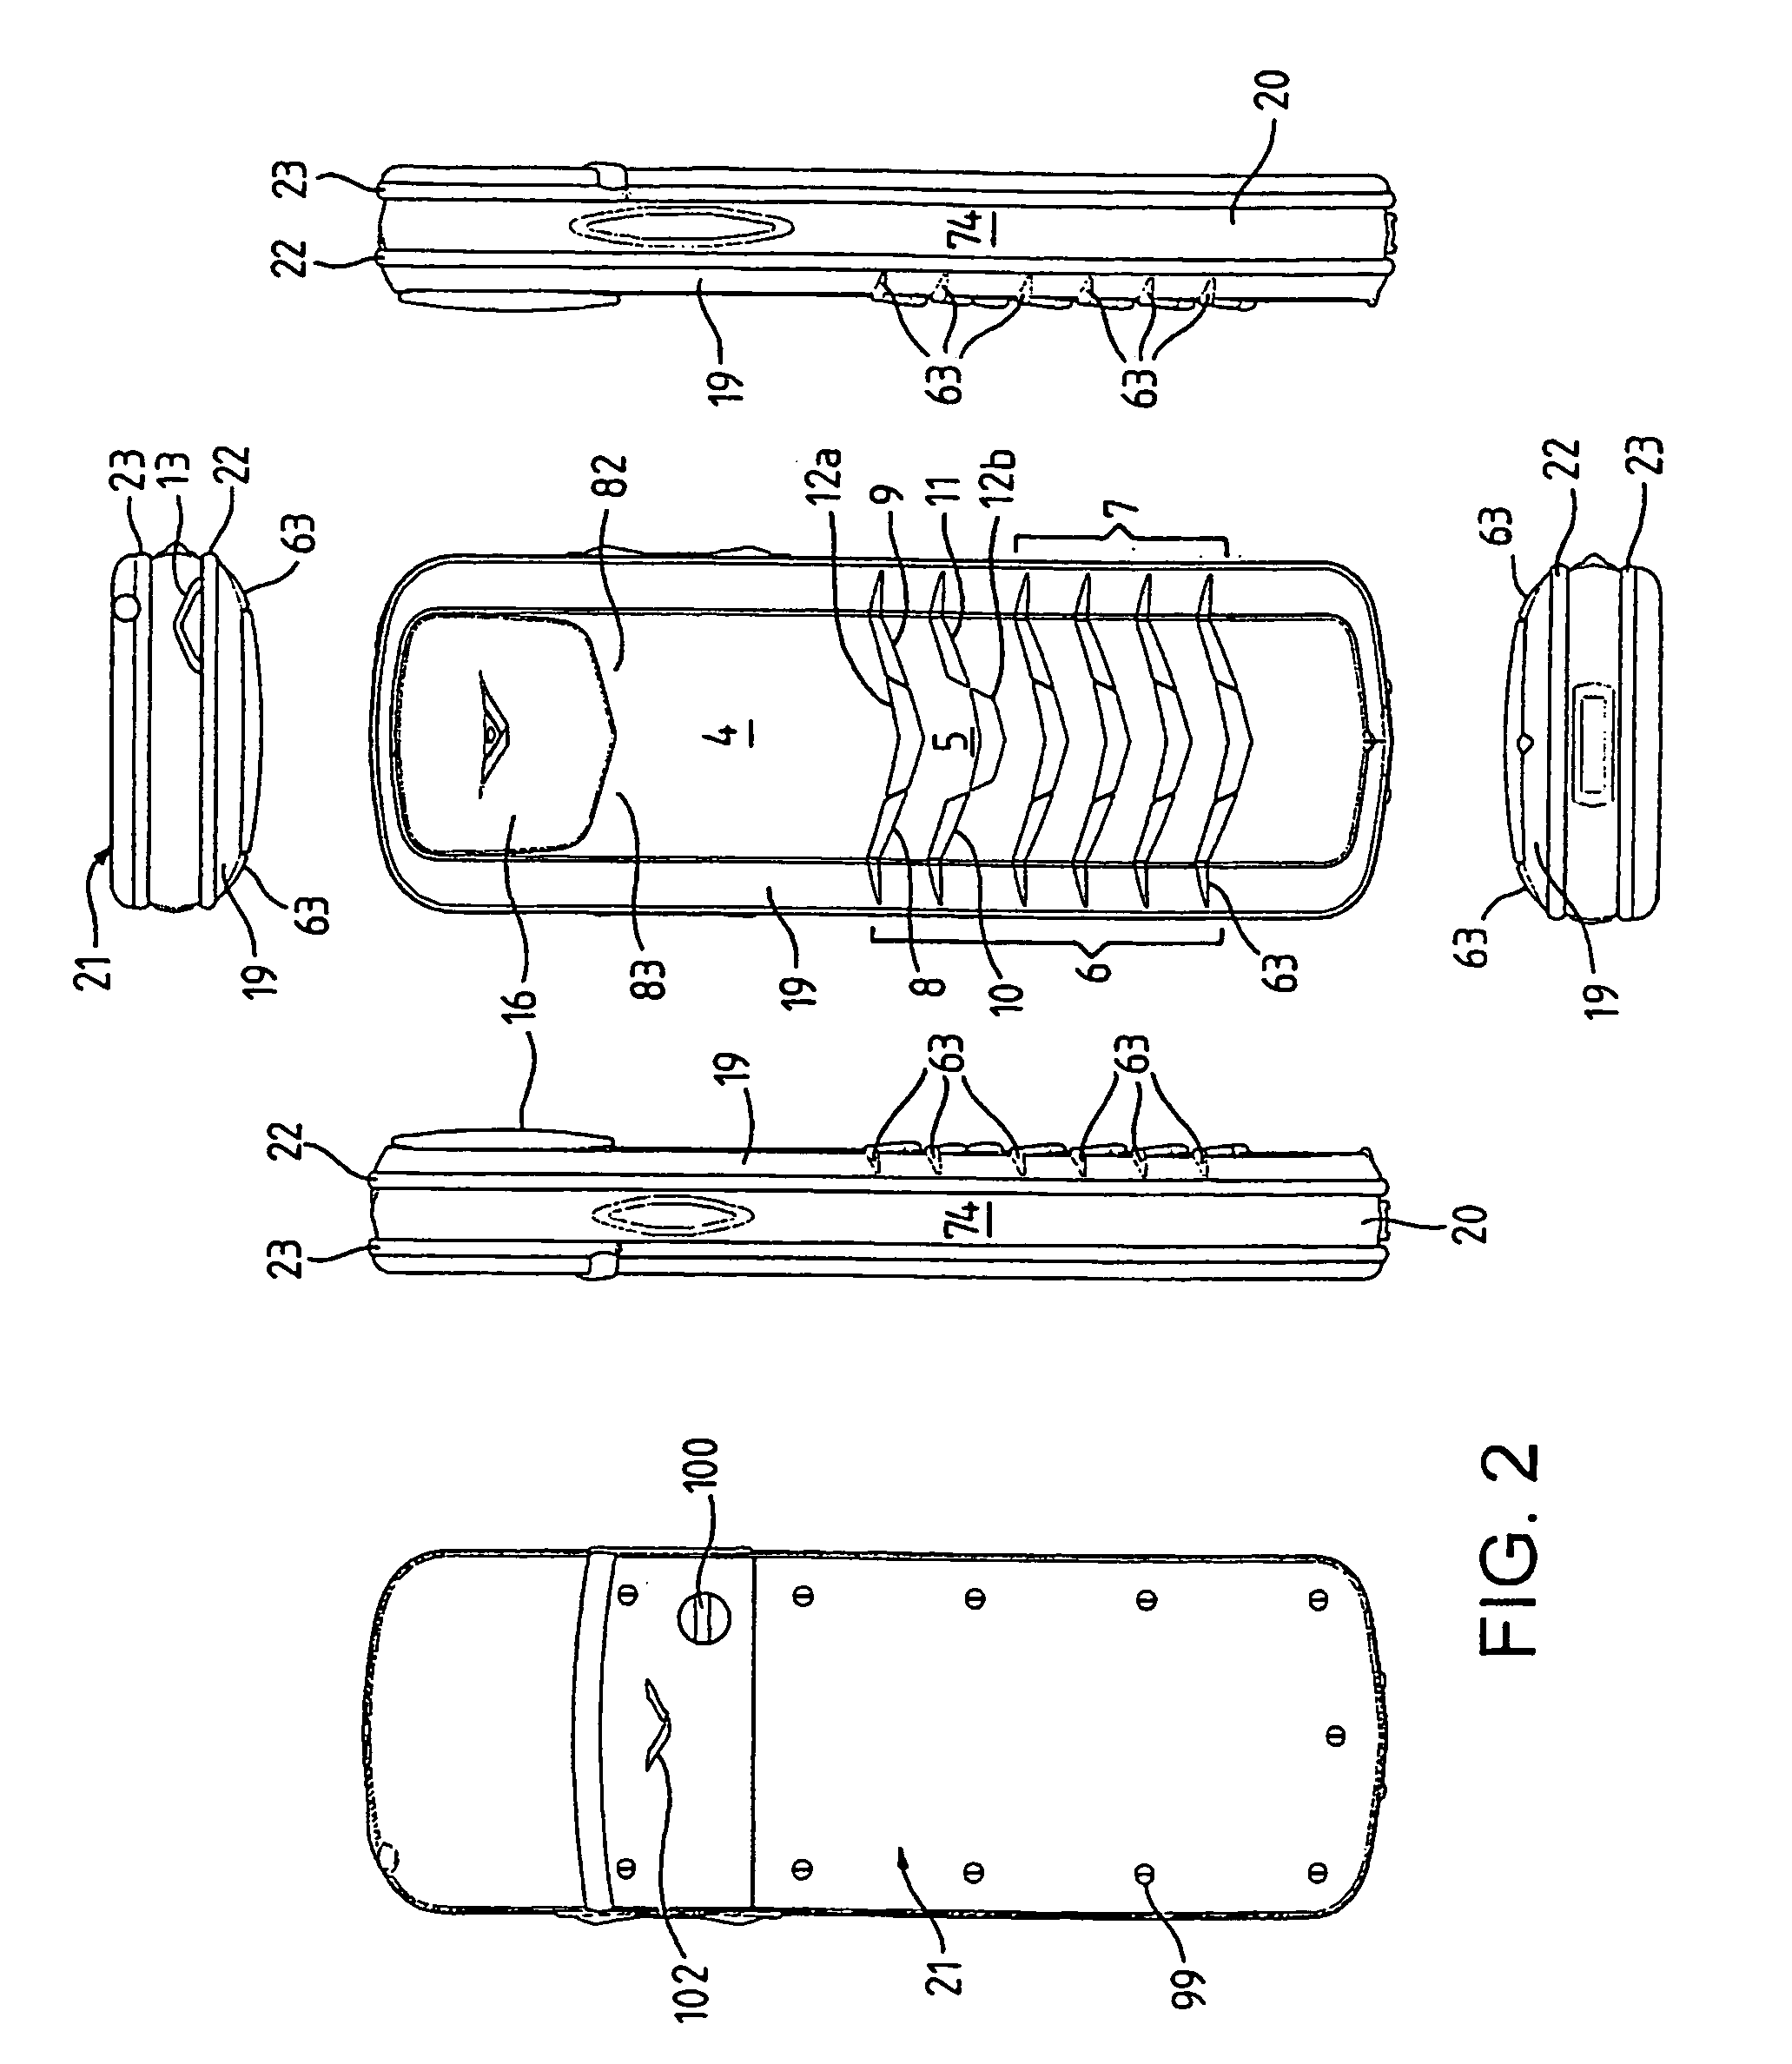 Casing for portable communication device